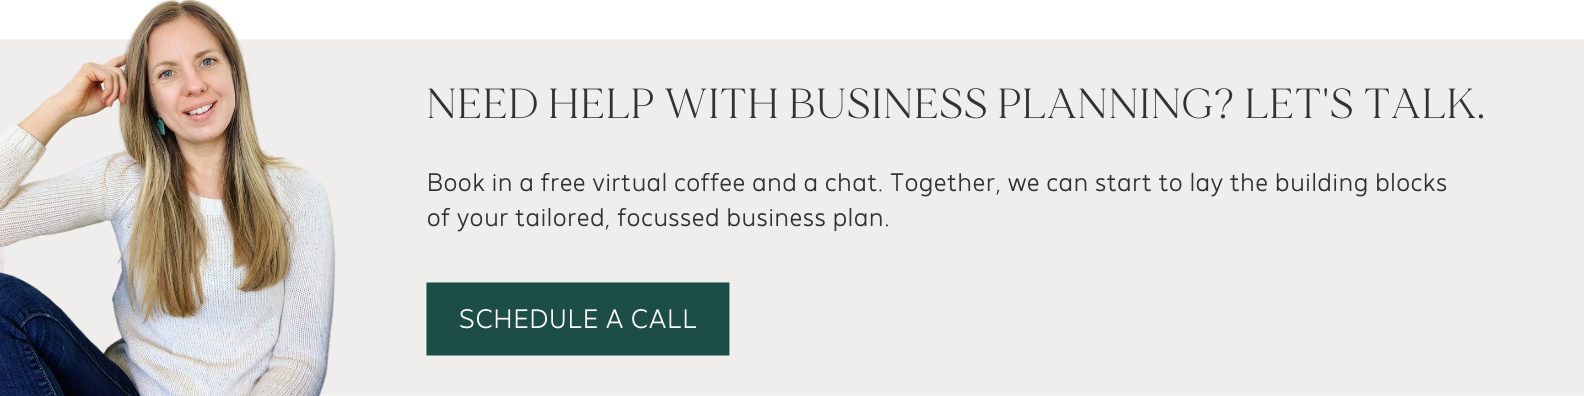 Text reads: Need help with business planning? Let's talk. Book in a free virtual coffee and a chat. Together, we can start to lay the building blocks of your tailored, focussed business plan'. You can click anywhere on the banner to book a call, it will take you to a scheduler.